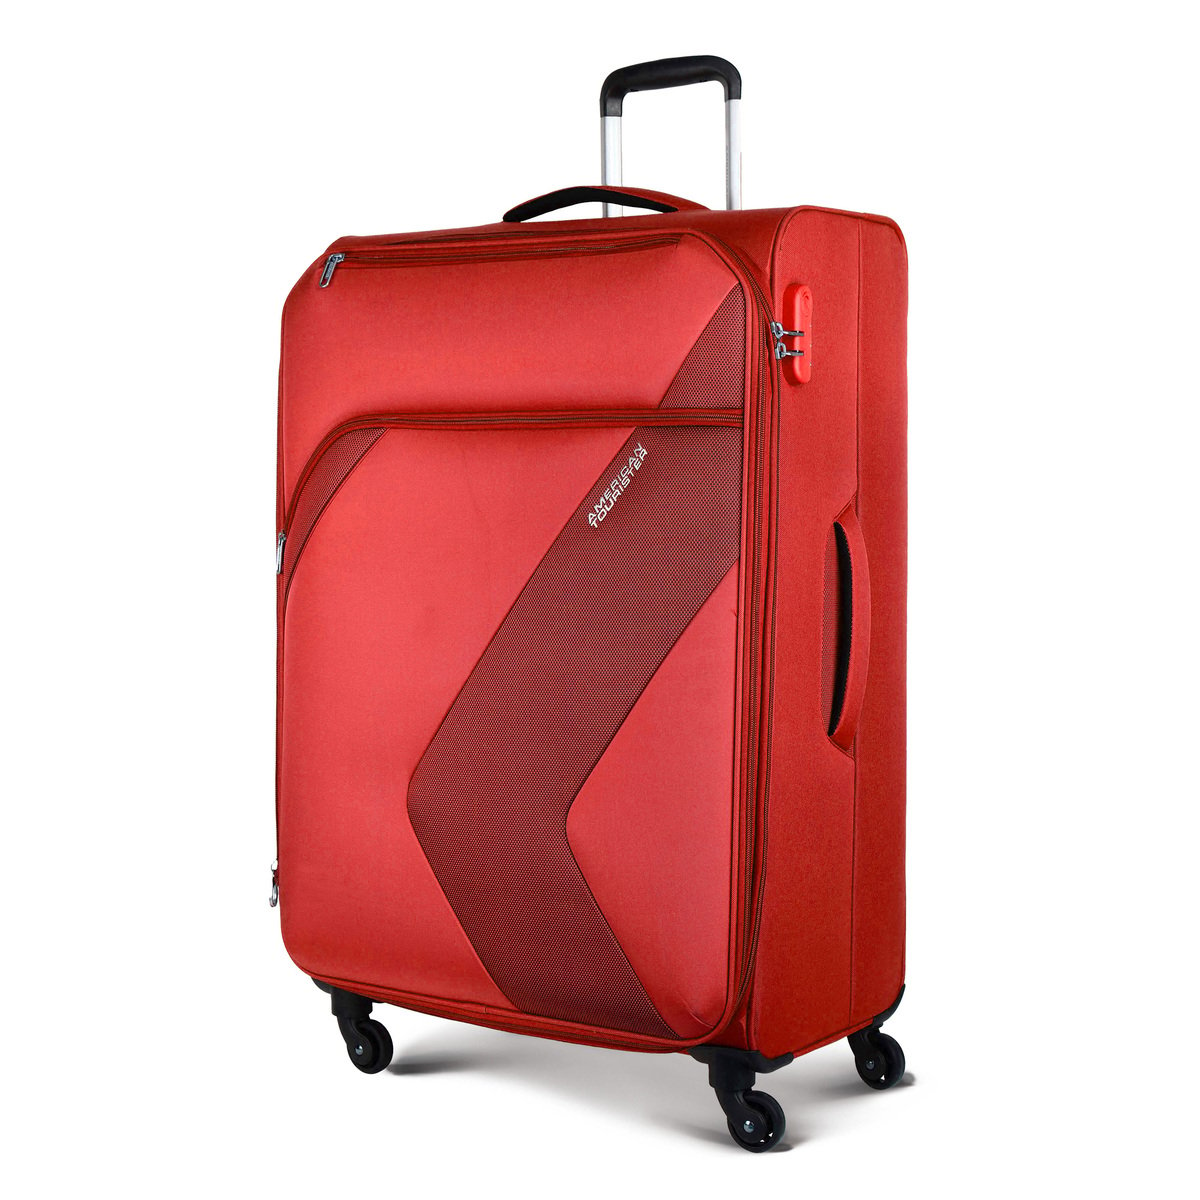 American Tourister Stanford 4 Wheel Soft Trolley, 67 cm, Red